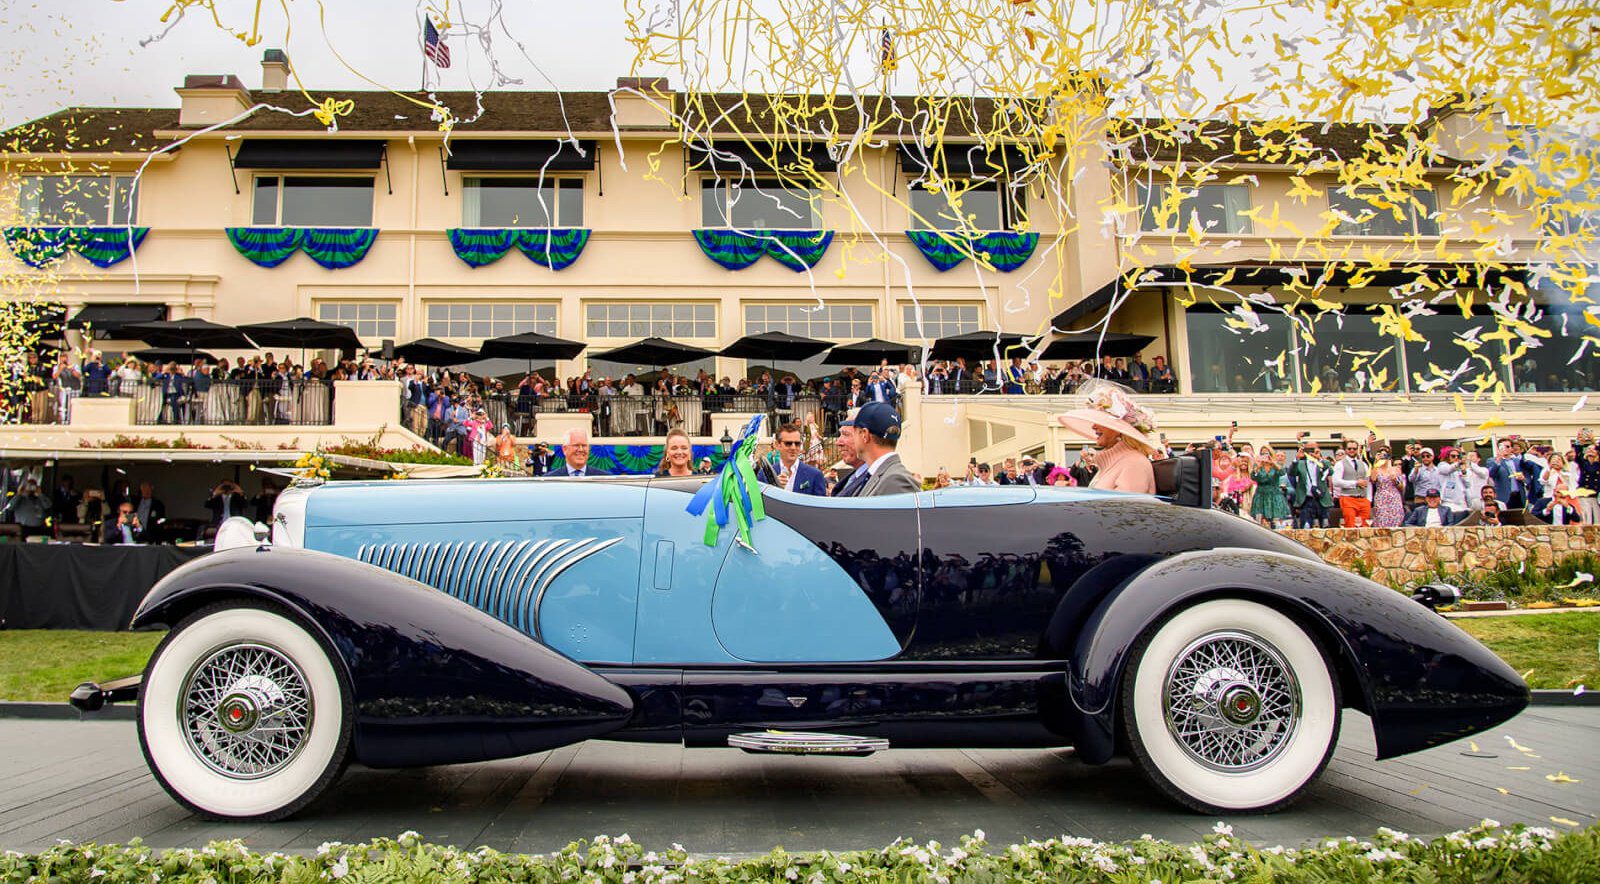 A day at the Pebble Beach Concours d'Elegance